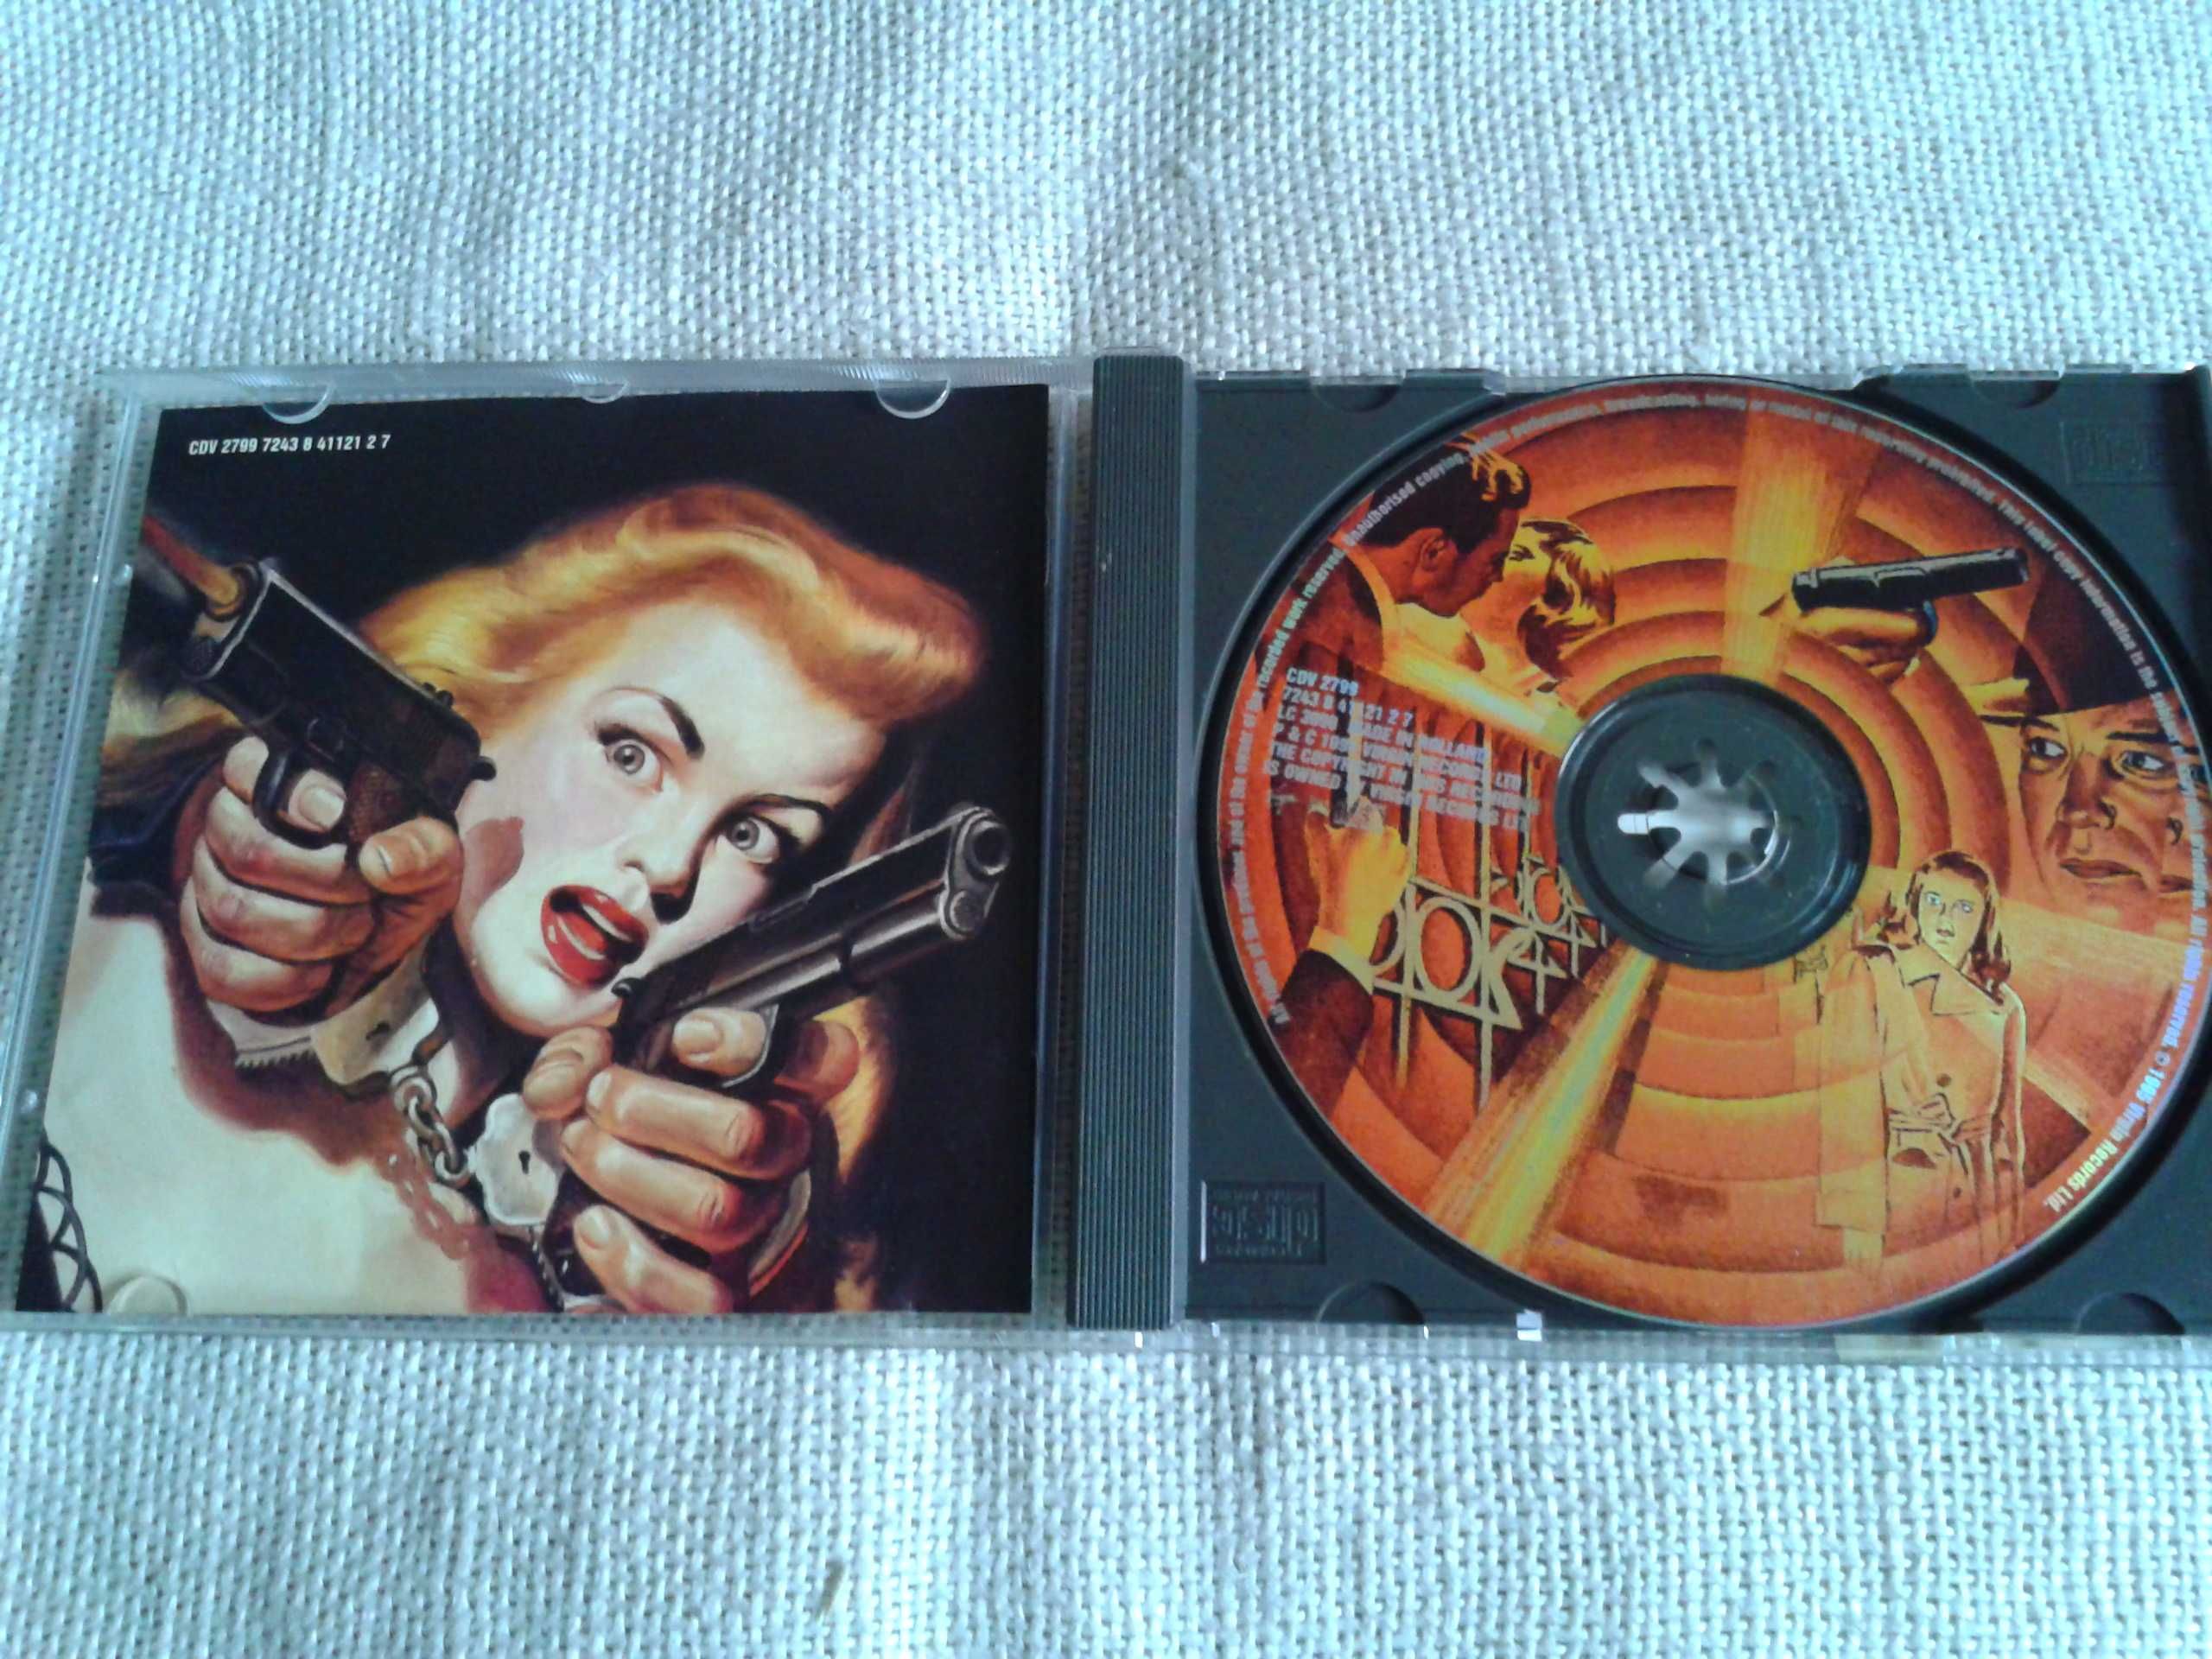 Meat Loaf - Welcome To The Neighbourhood  CD